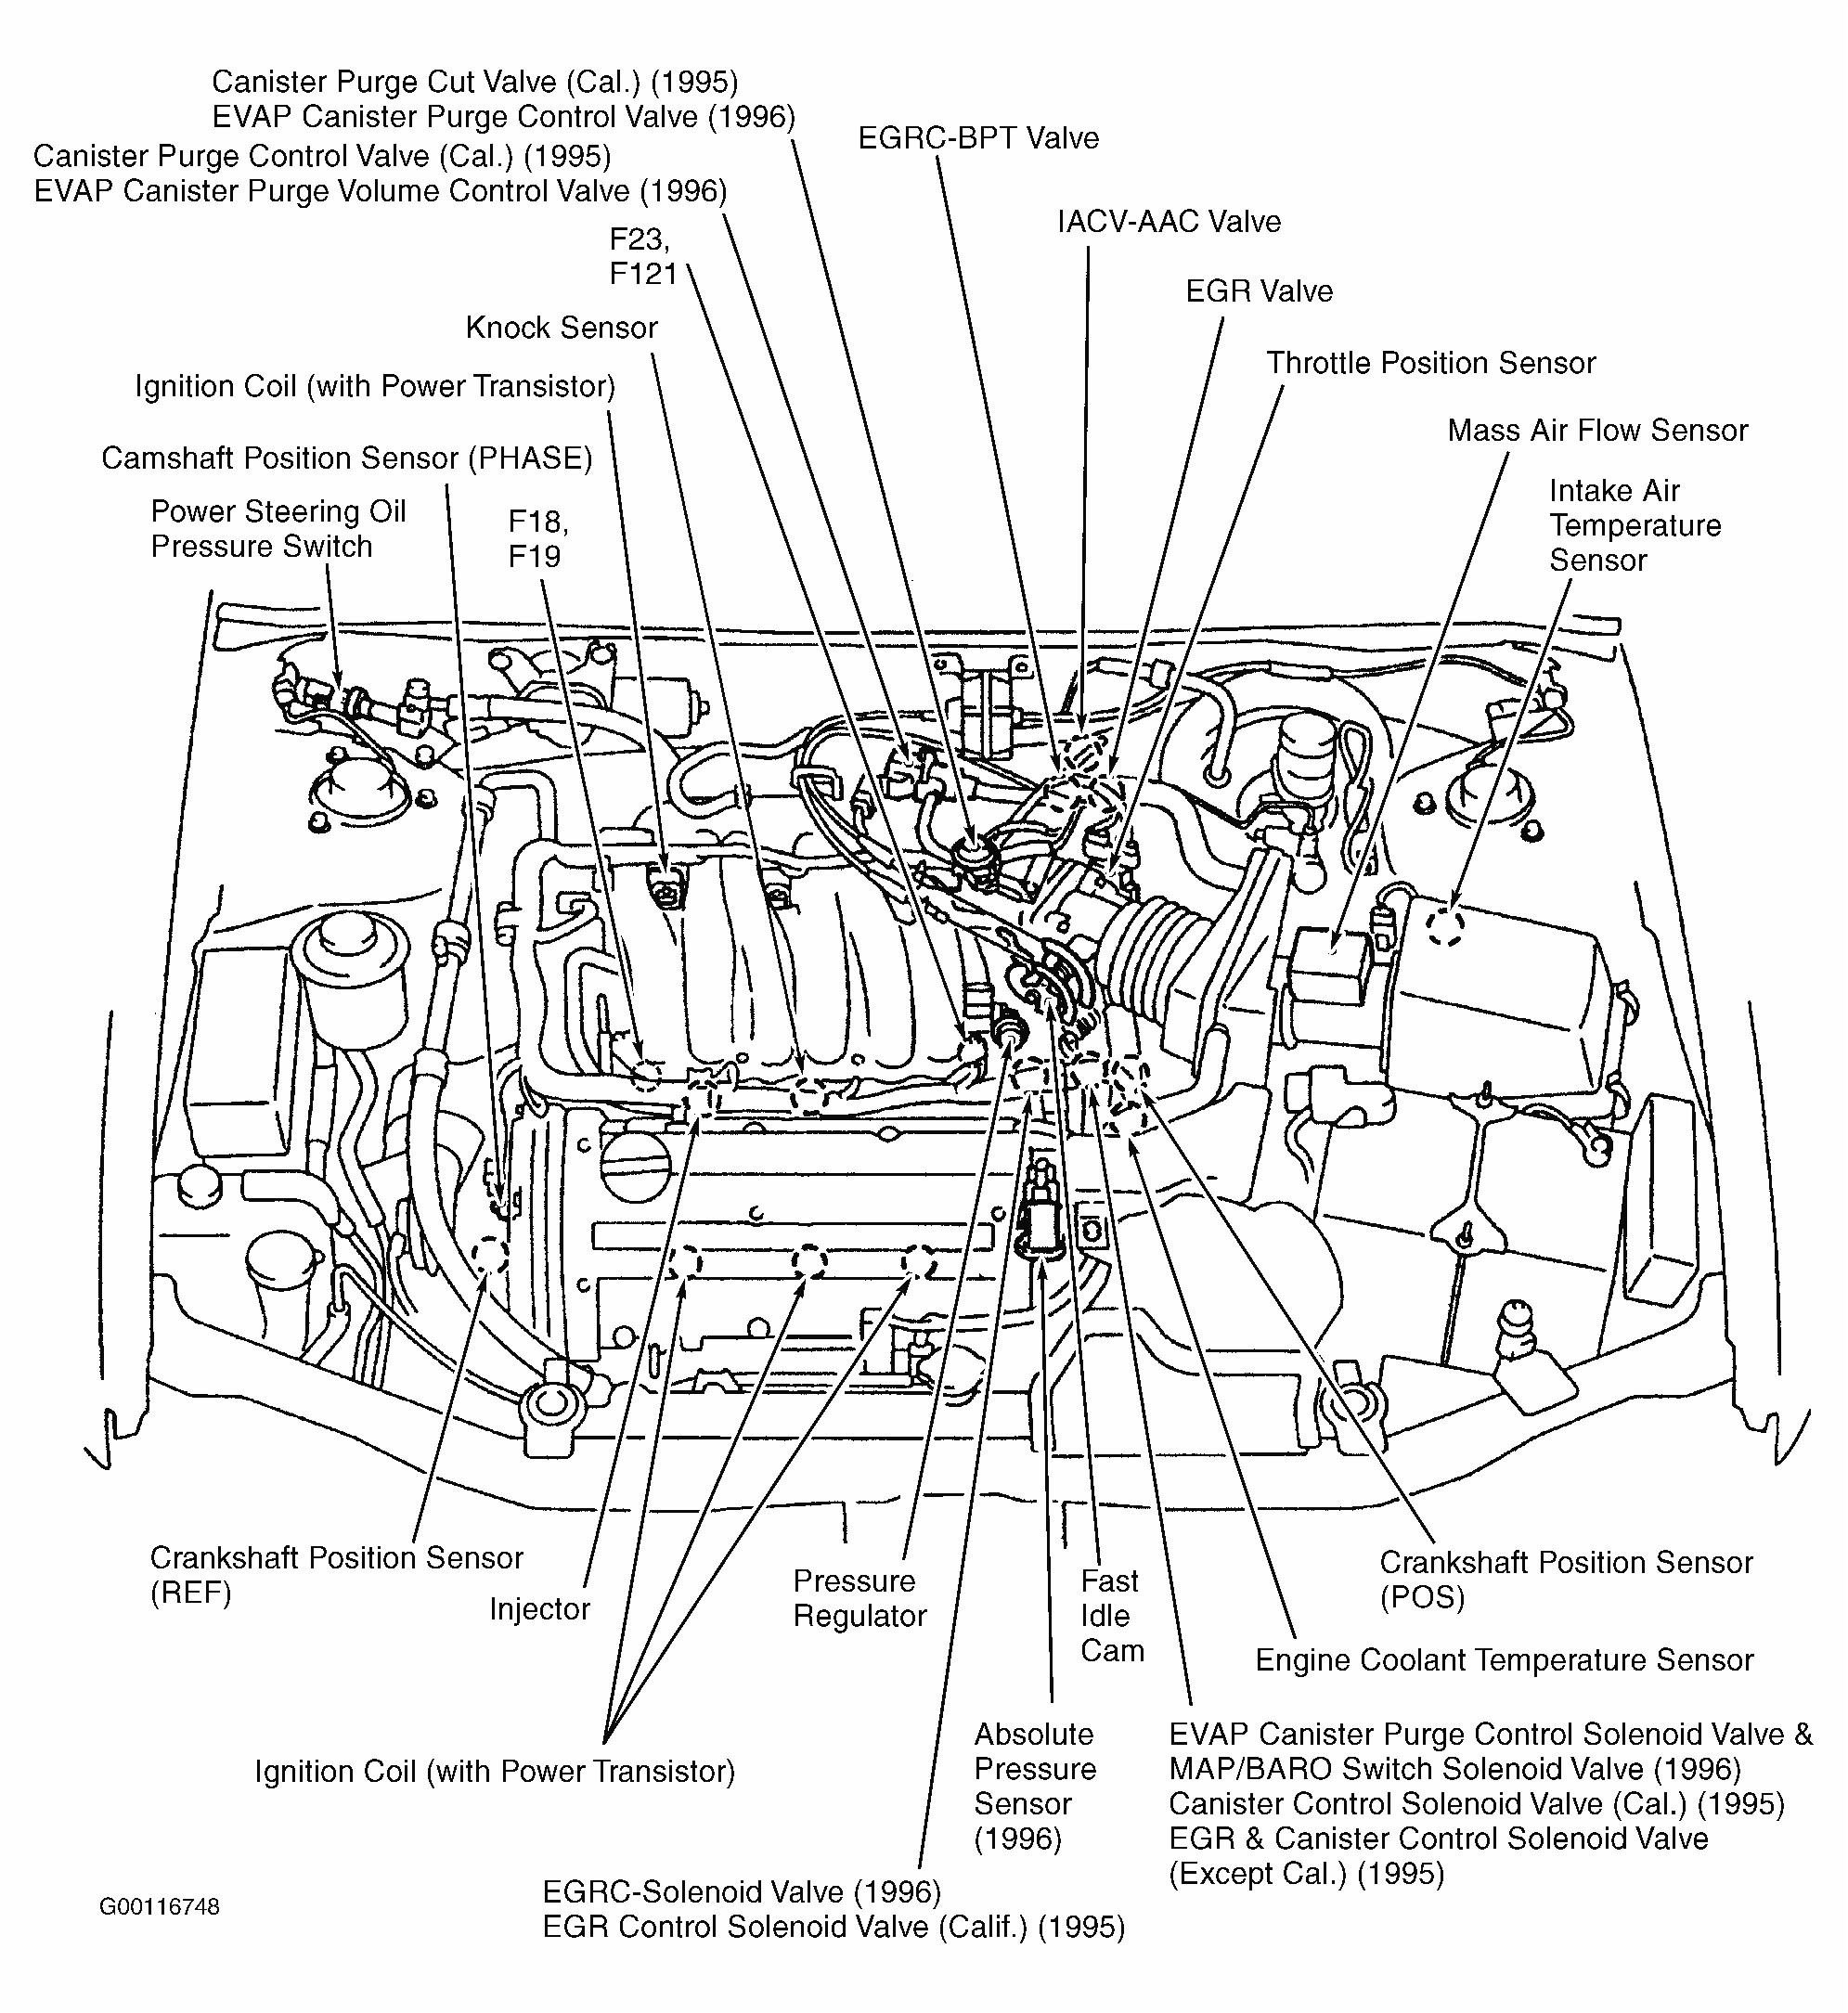 1995 nissan maxima wiring diagram reference 45 luxury 2005 nissan altima serpentine belt diagram collection of 1995 nissan maxima wiring diagram jpg